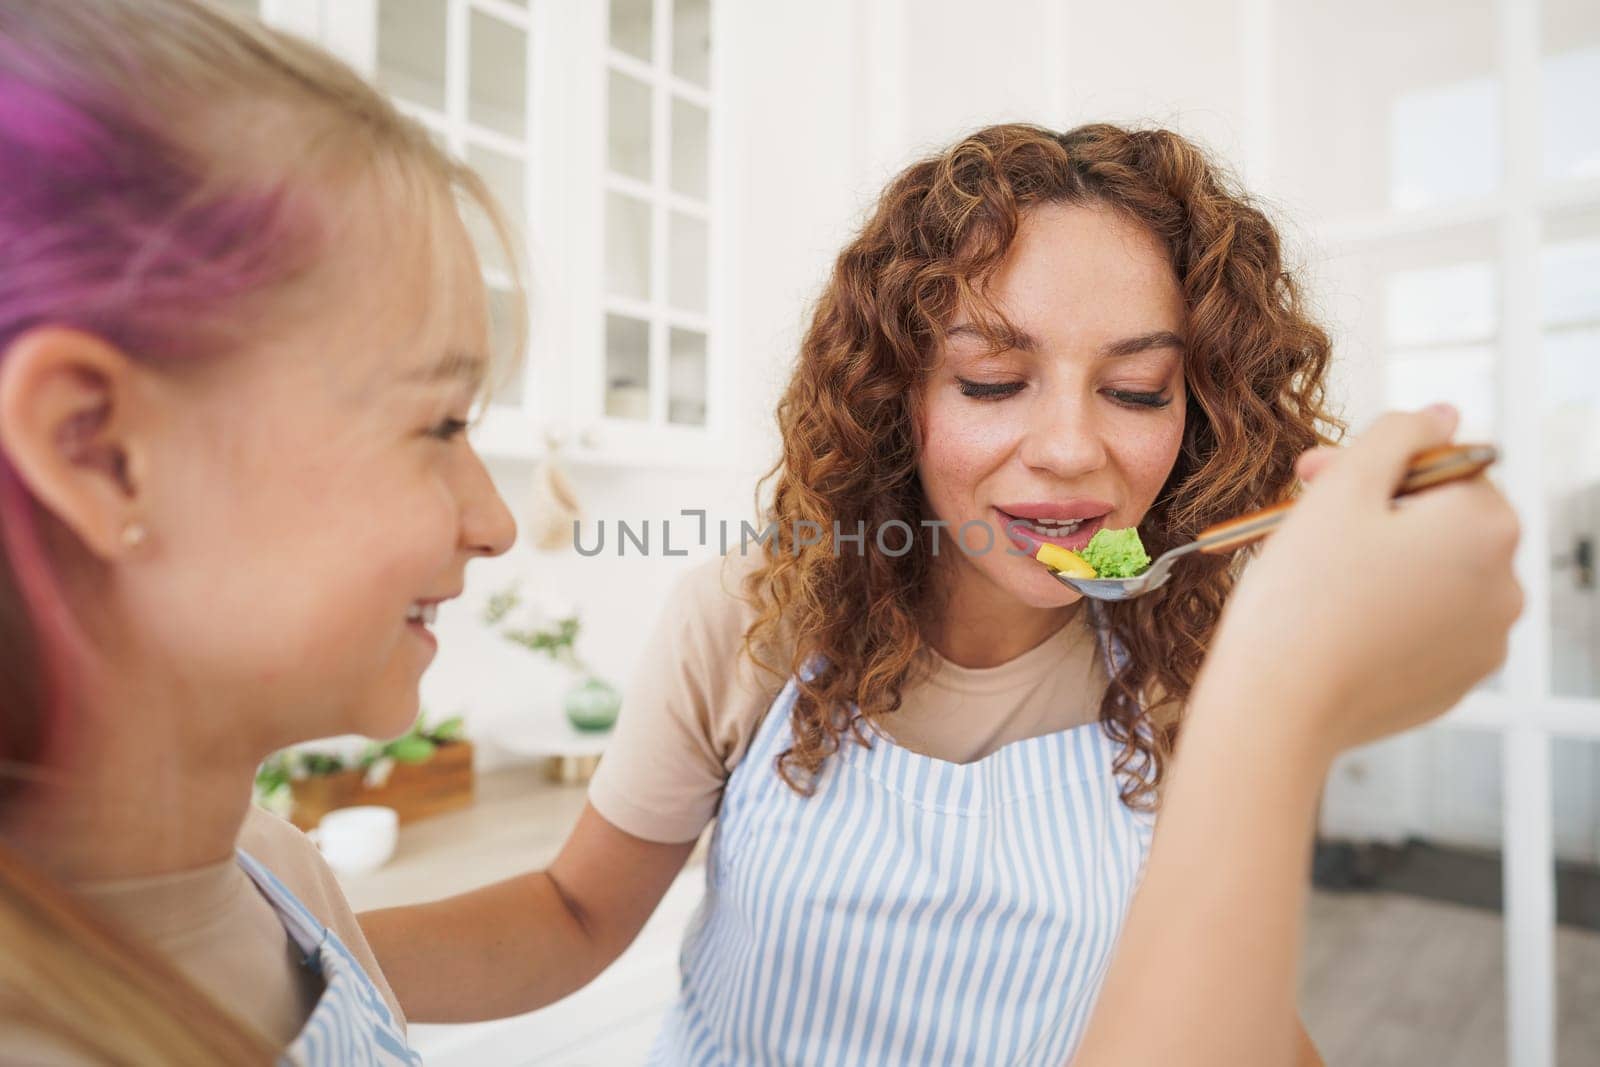 Portrait of a teen girl with her mother at home in kitchen, close up